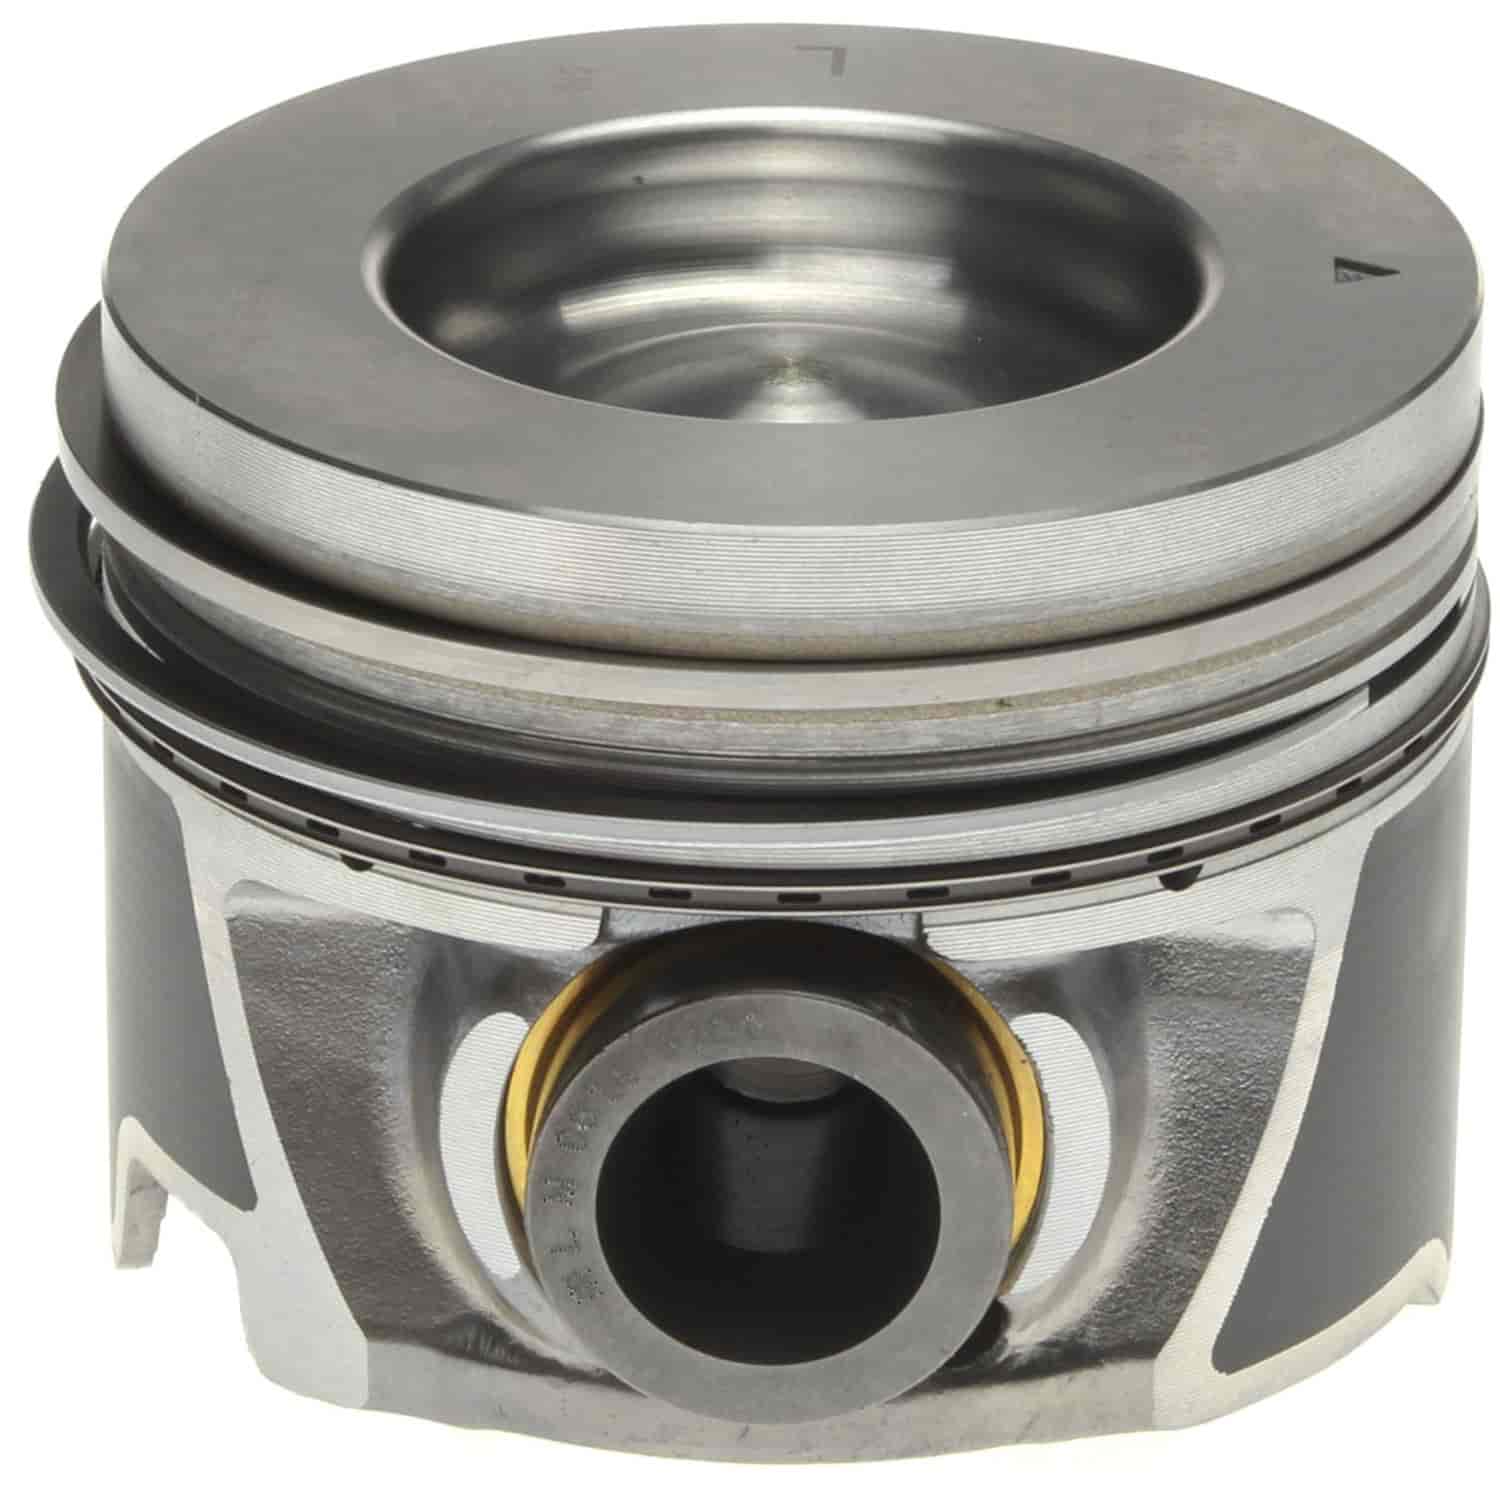 Piston Set With Rings 2006-2010 Chevy/GMC Duramax Diesel V8 6.6L Left Bank with 4.065" Bore (+.010")